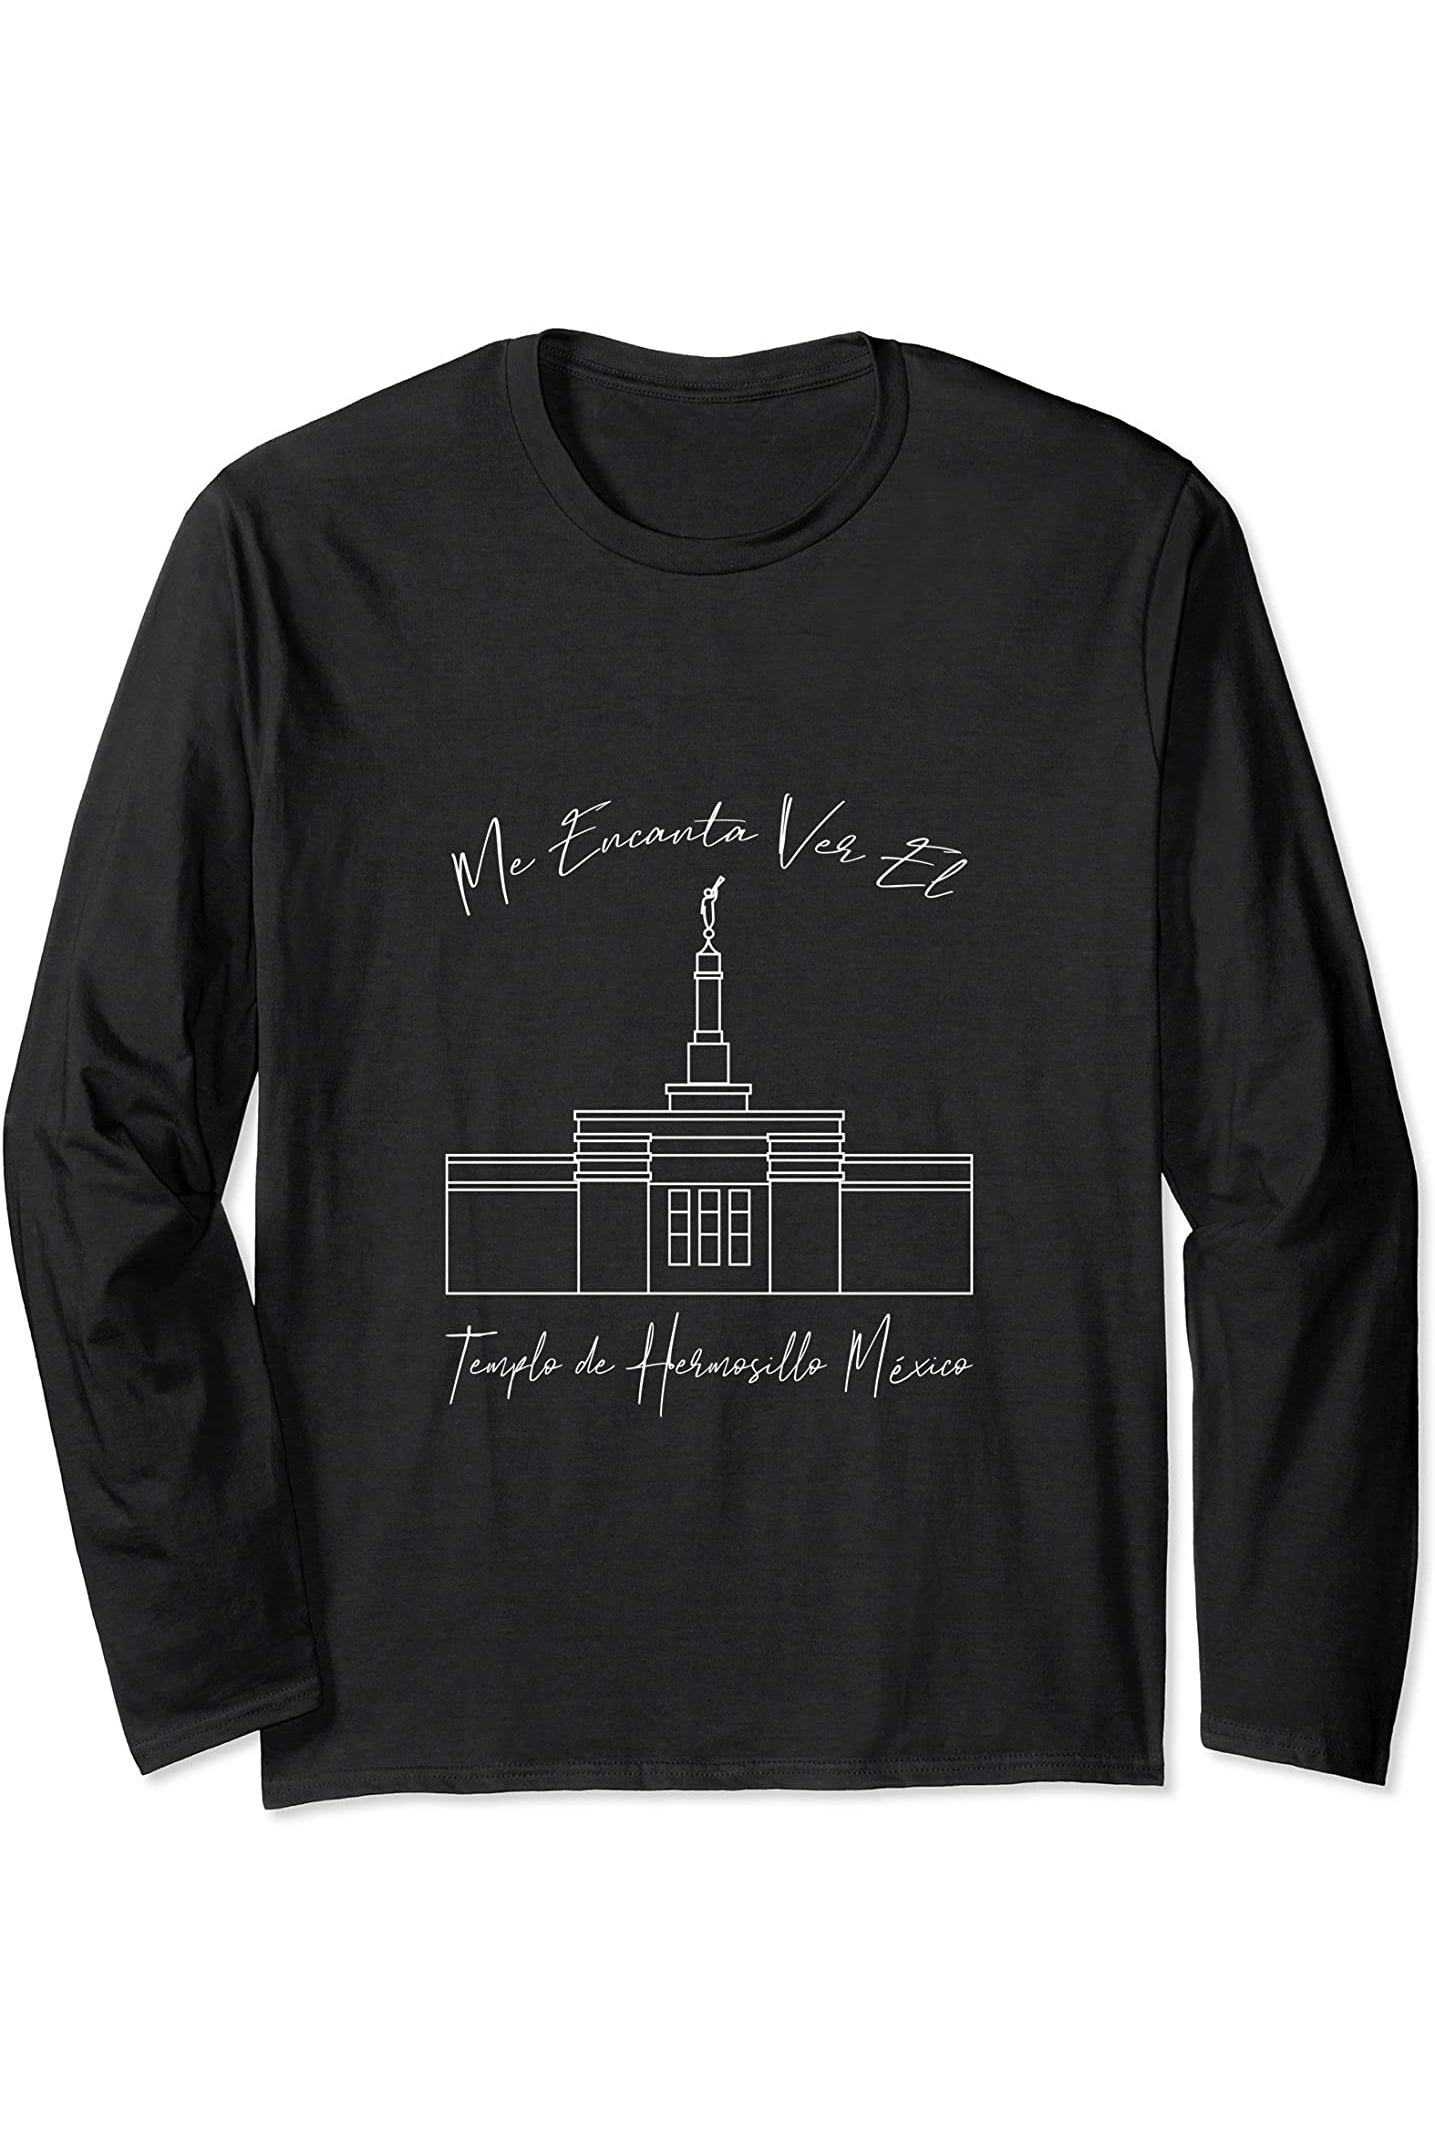 Hermosillo Mexico Temple Long Sleeve T-Shirt - Calligraphy Style (Spanish) US